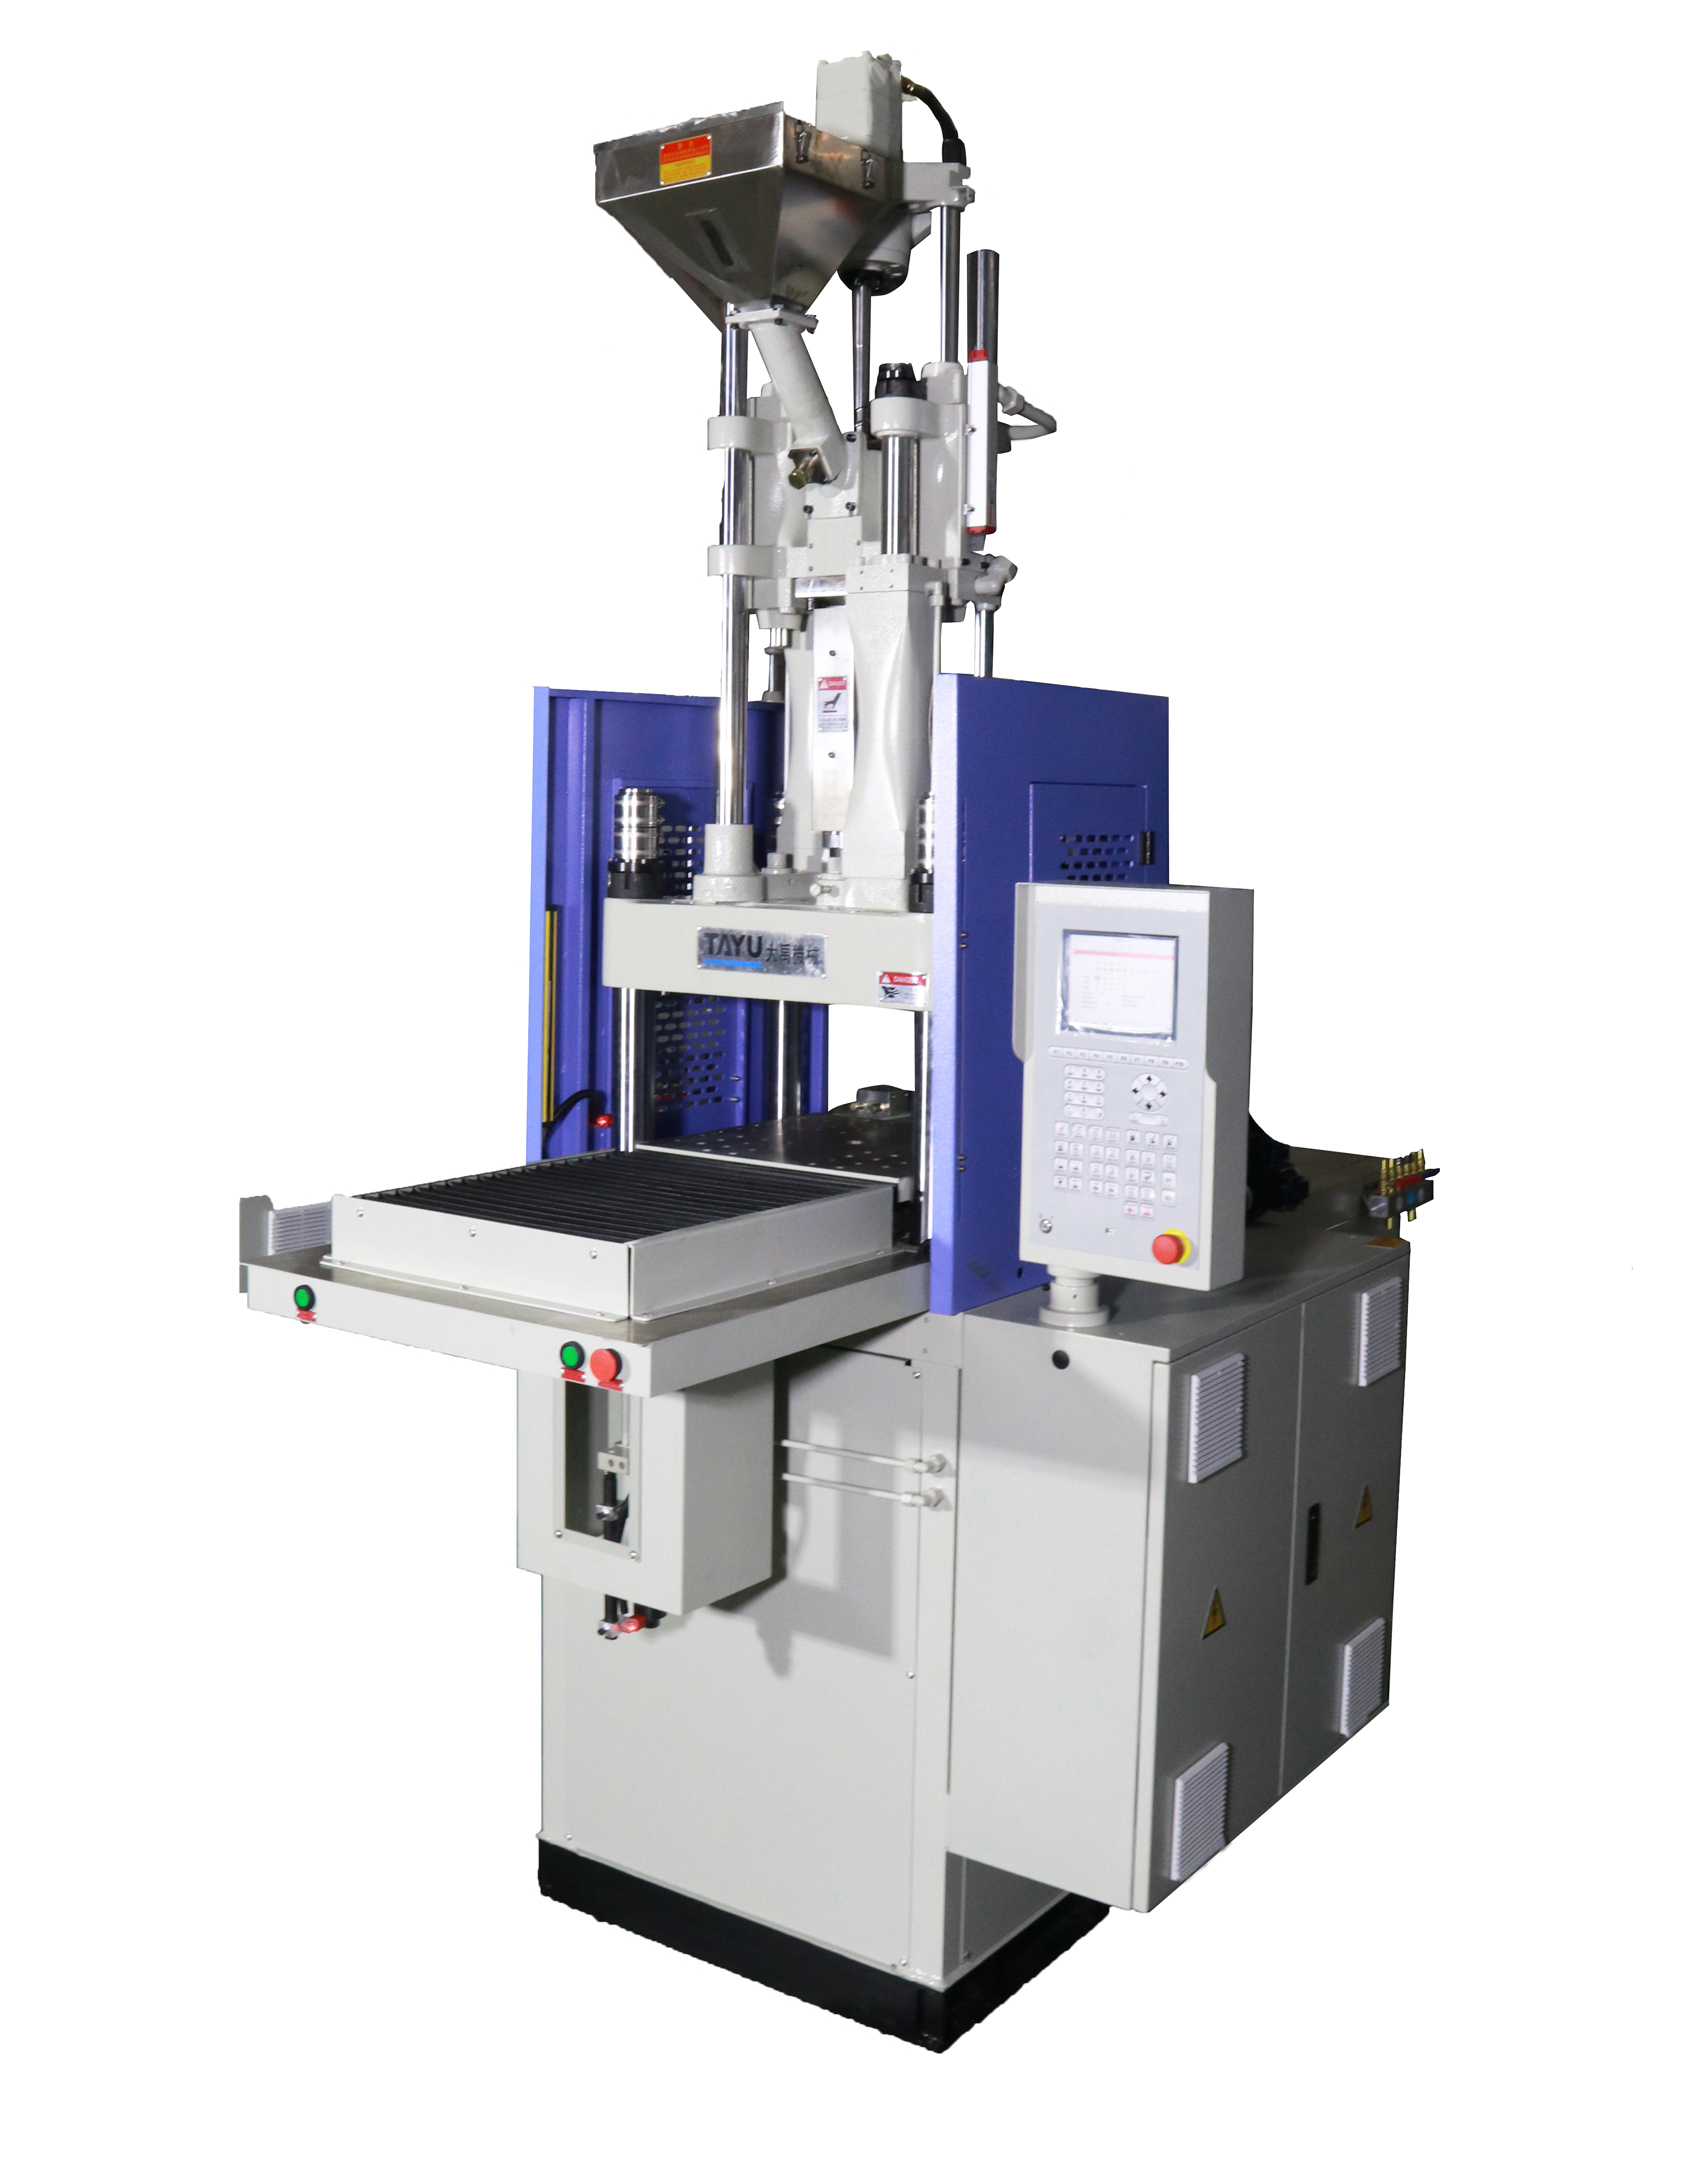 TY-700S vertical injection molding machine